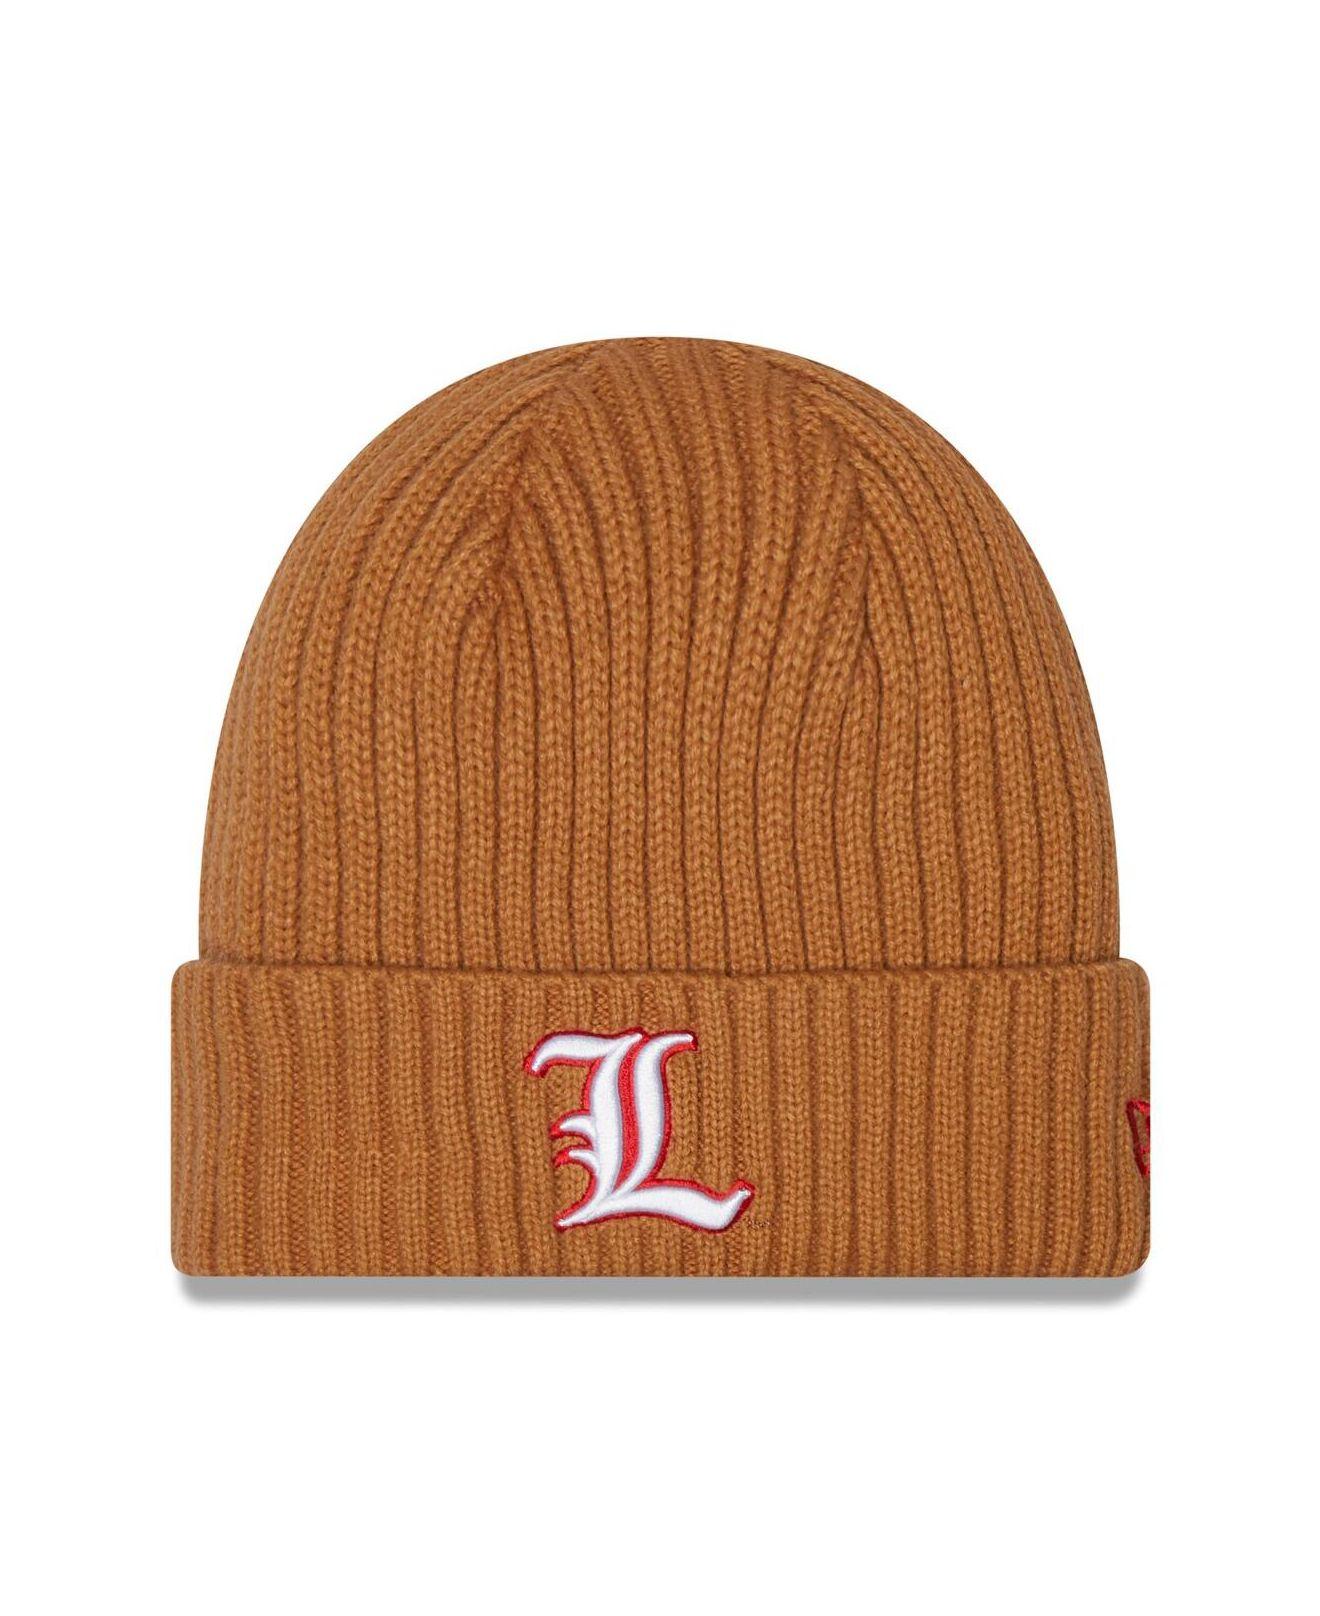 Los Angeles Lakers Mitchell & Ness Gray Hardwood Classics Draft Cuffed Knit  Hat with Pom